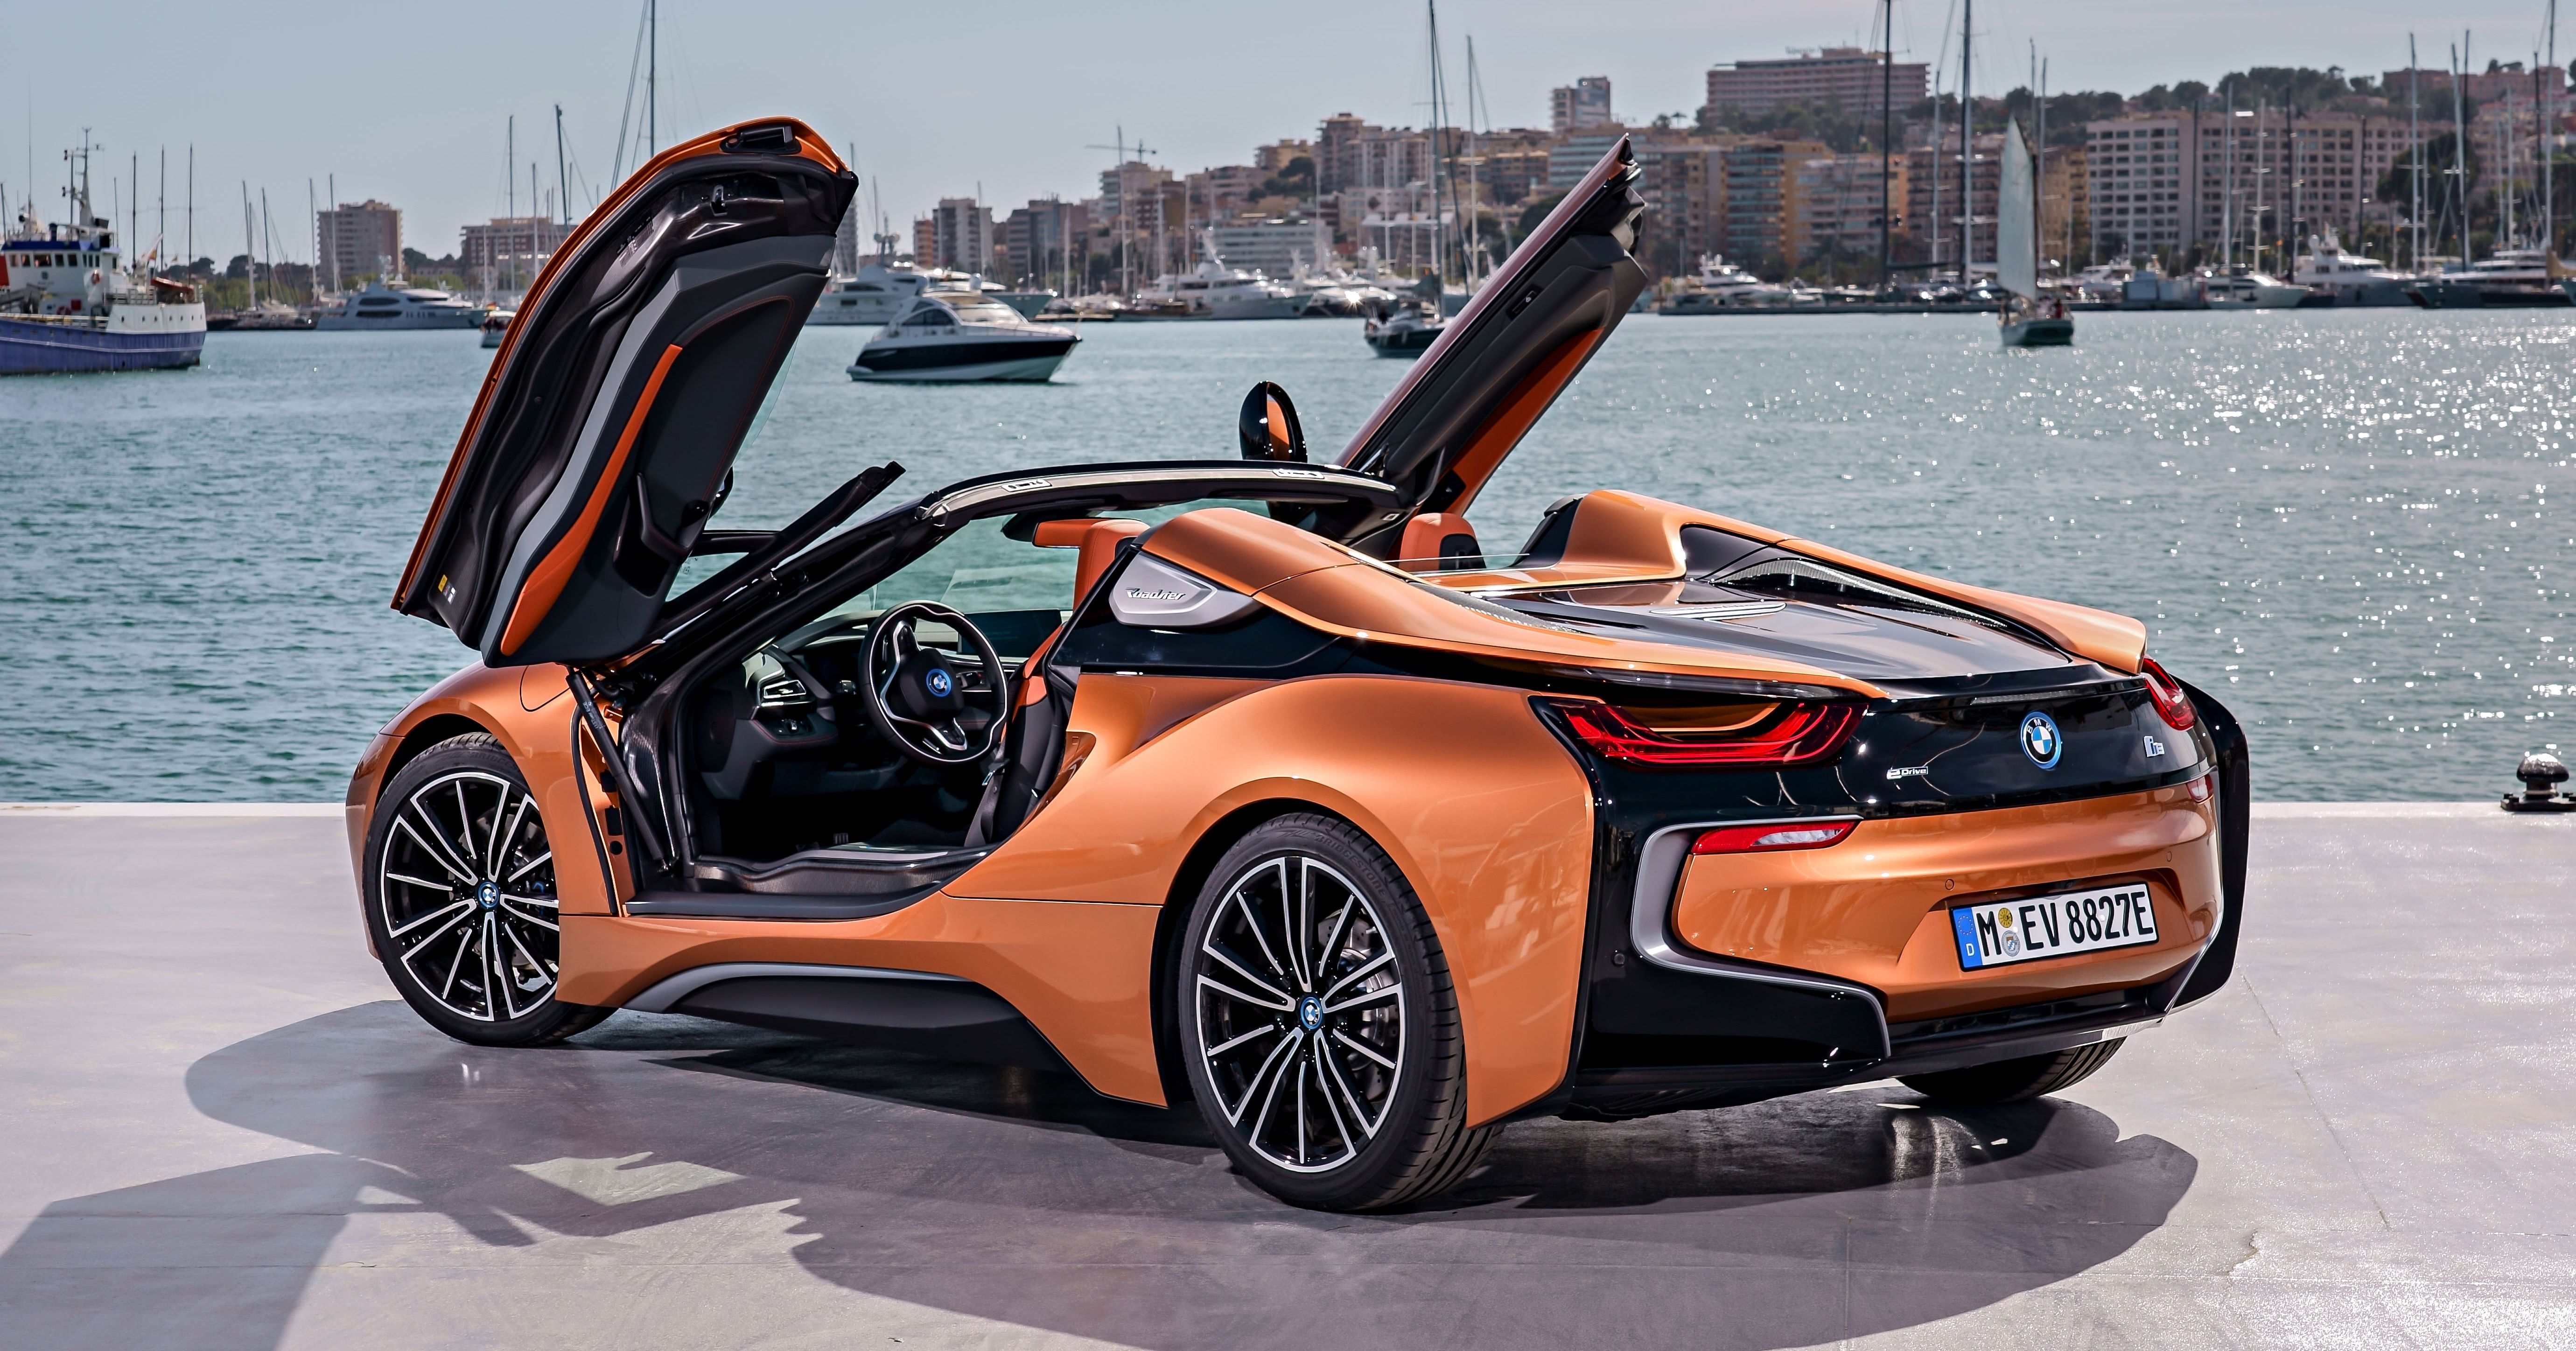 BMW i8 Roadster launched in Malaysia - RM1.5 million BMW ...